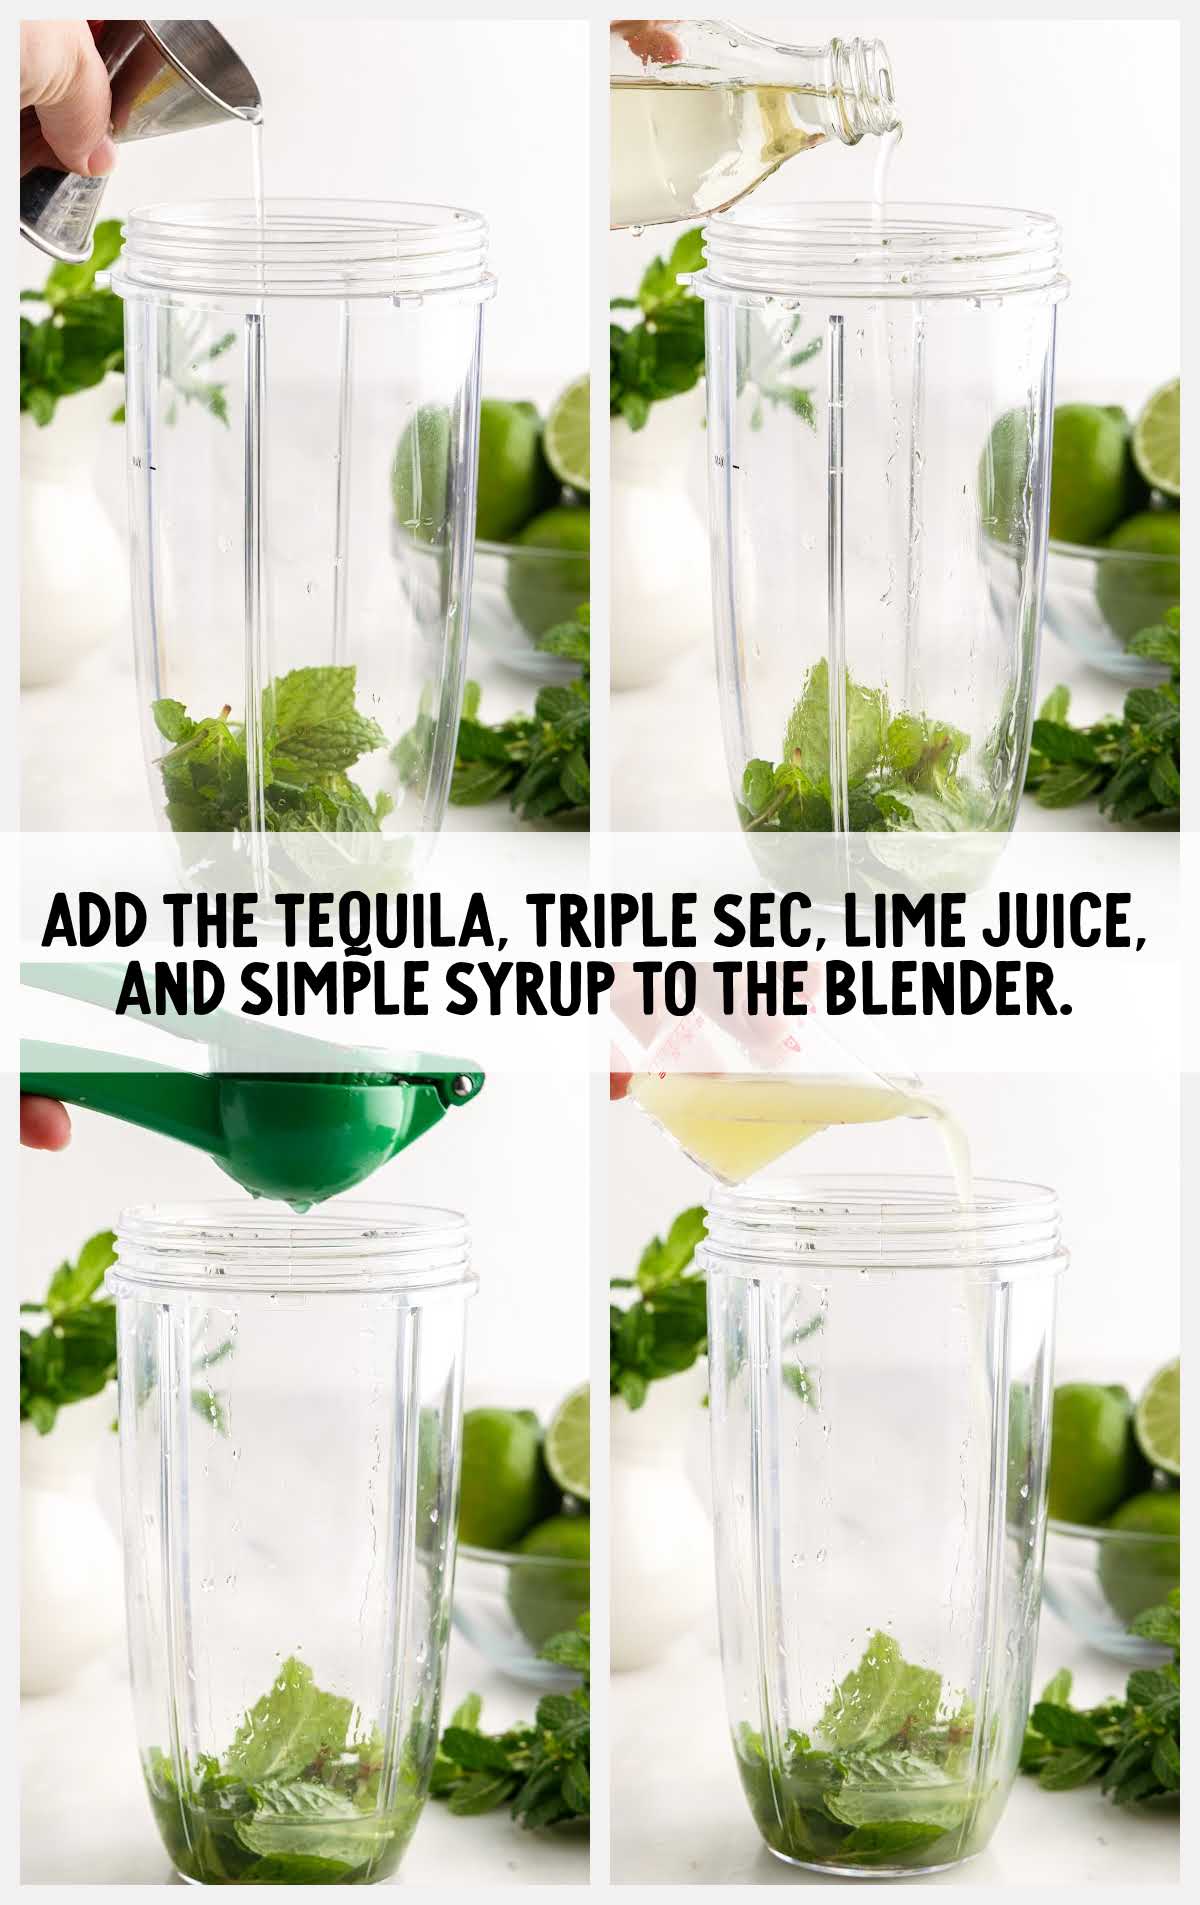 tequila, triple sec, lime juice, and simple syrup added to the blender